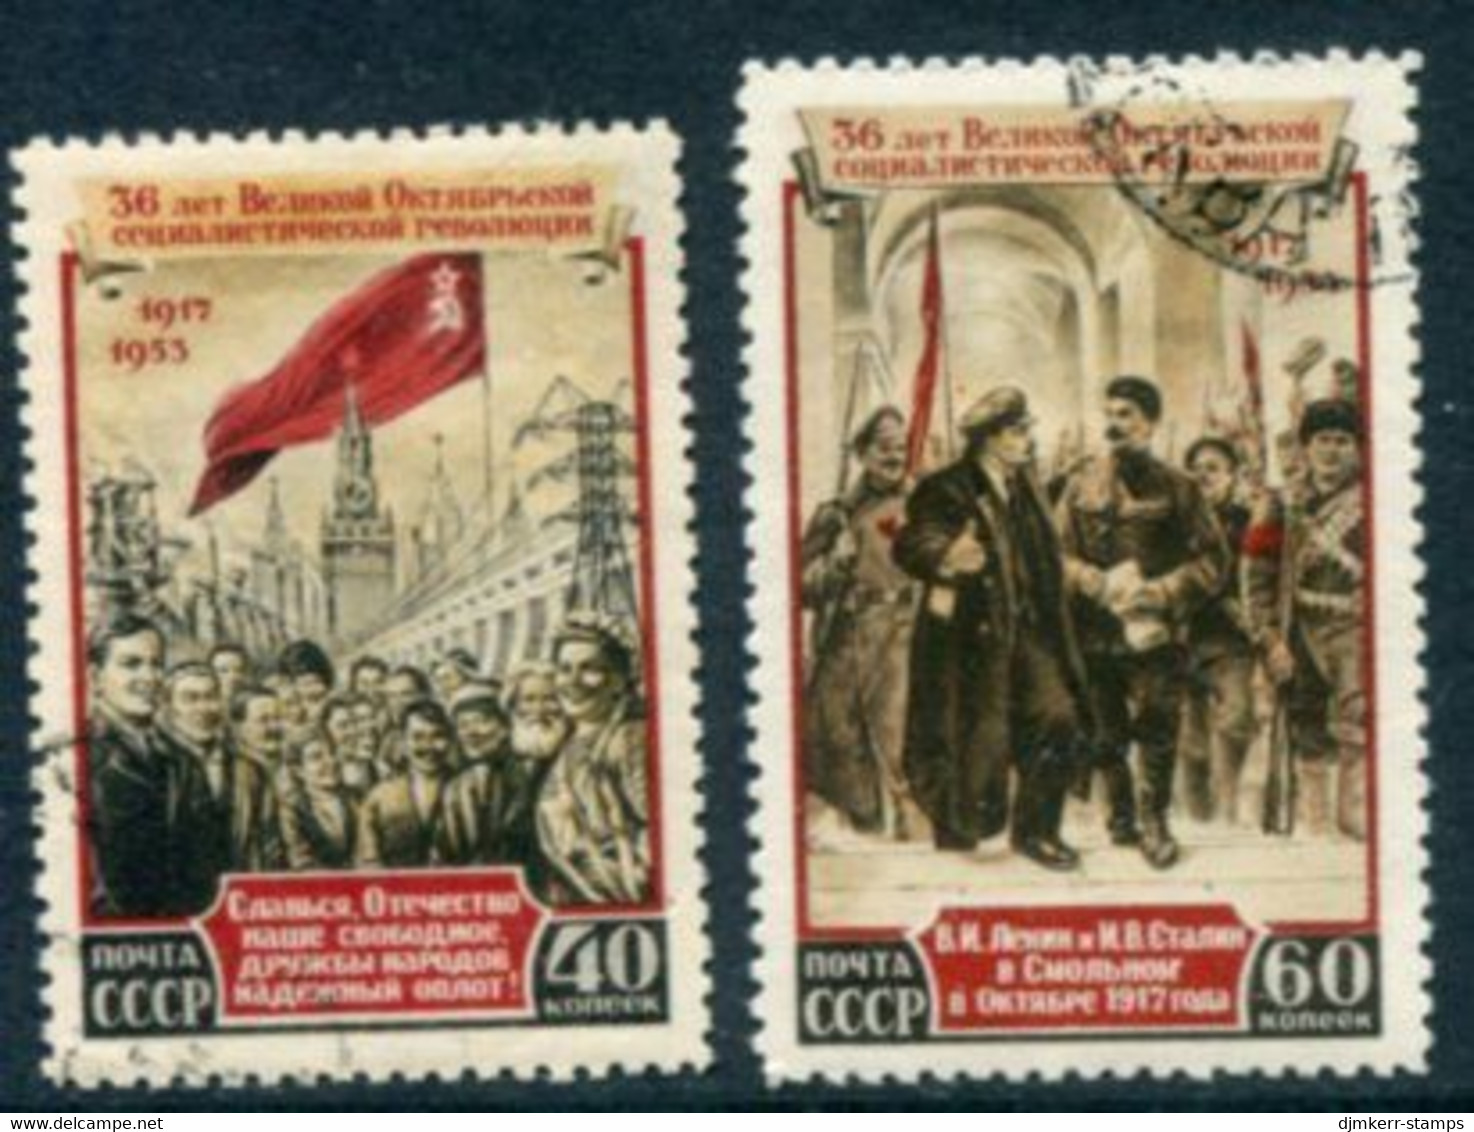 SOVIET UNION 1953 October Revolution 36th Anniversary, Used.  Michel 1679-80 - Used Stamps